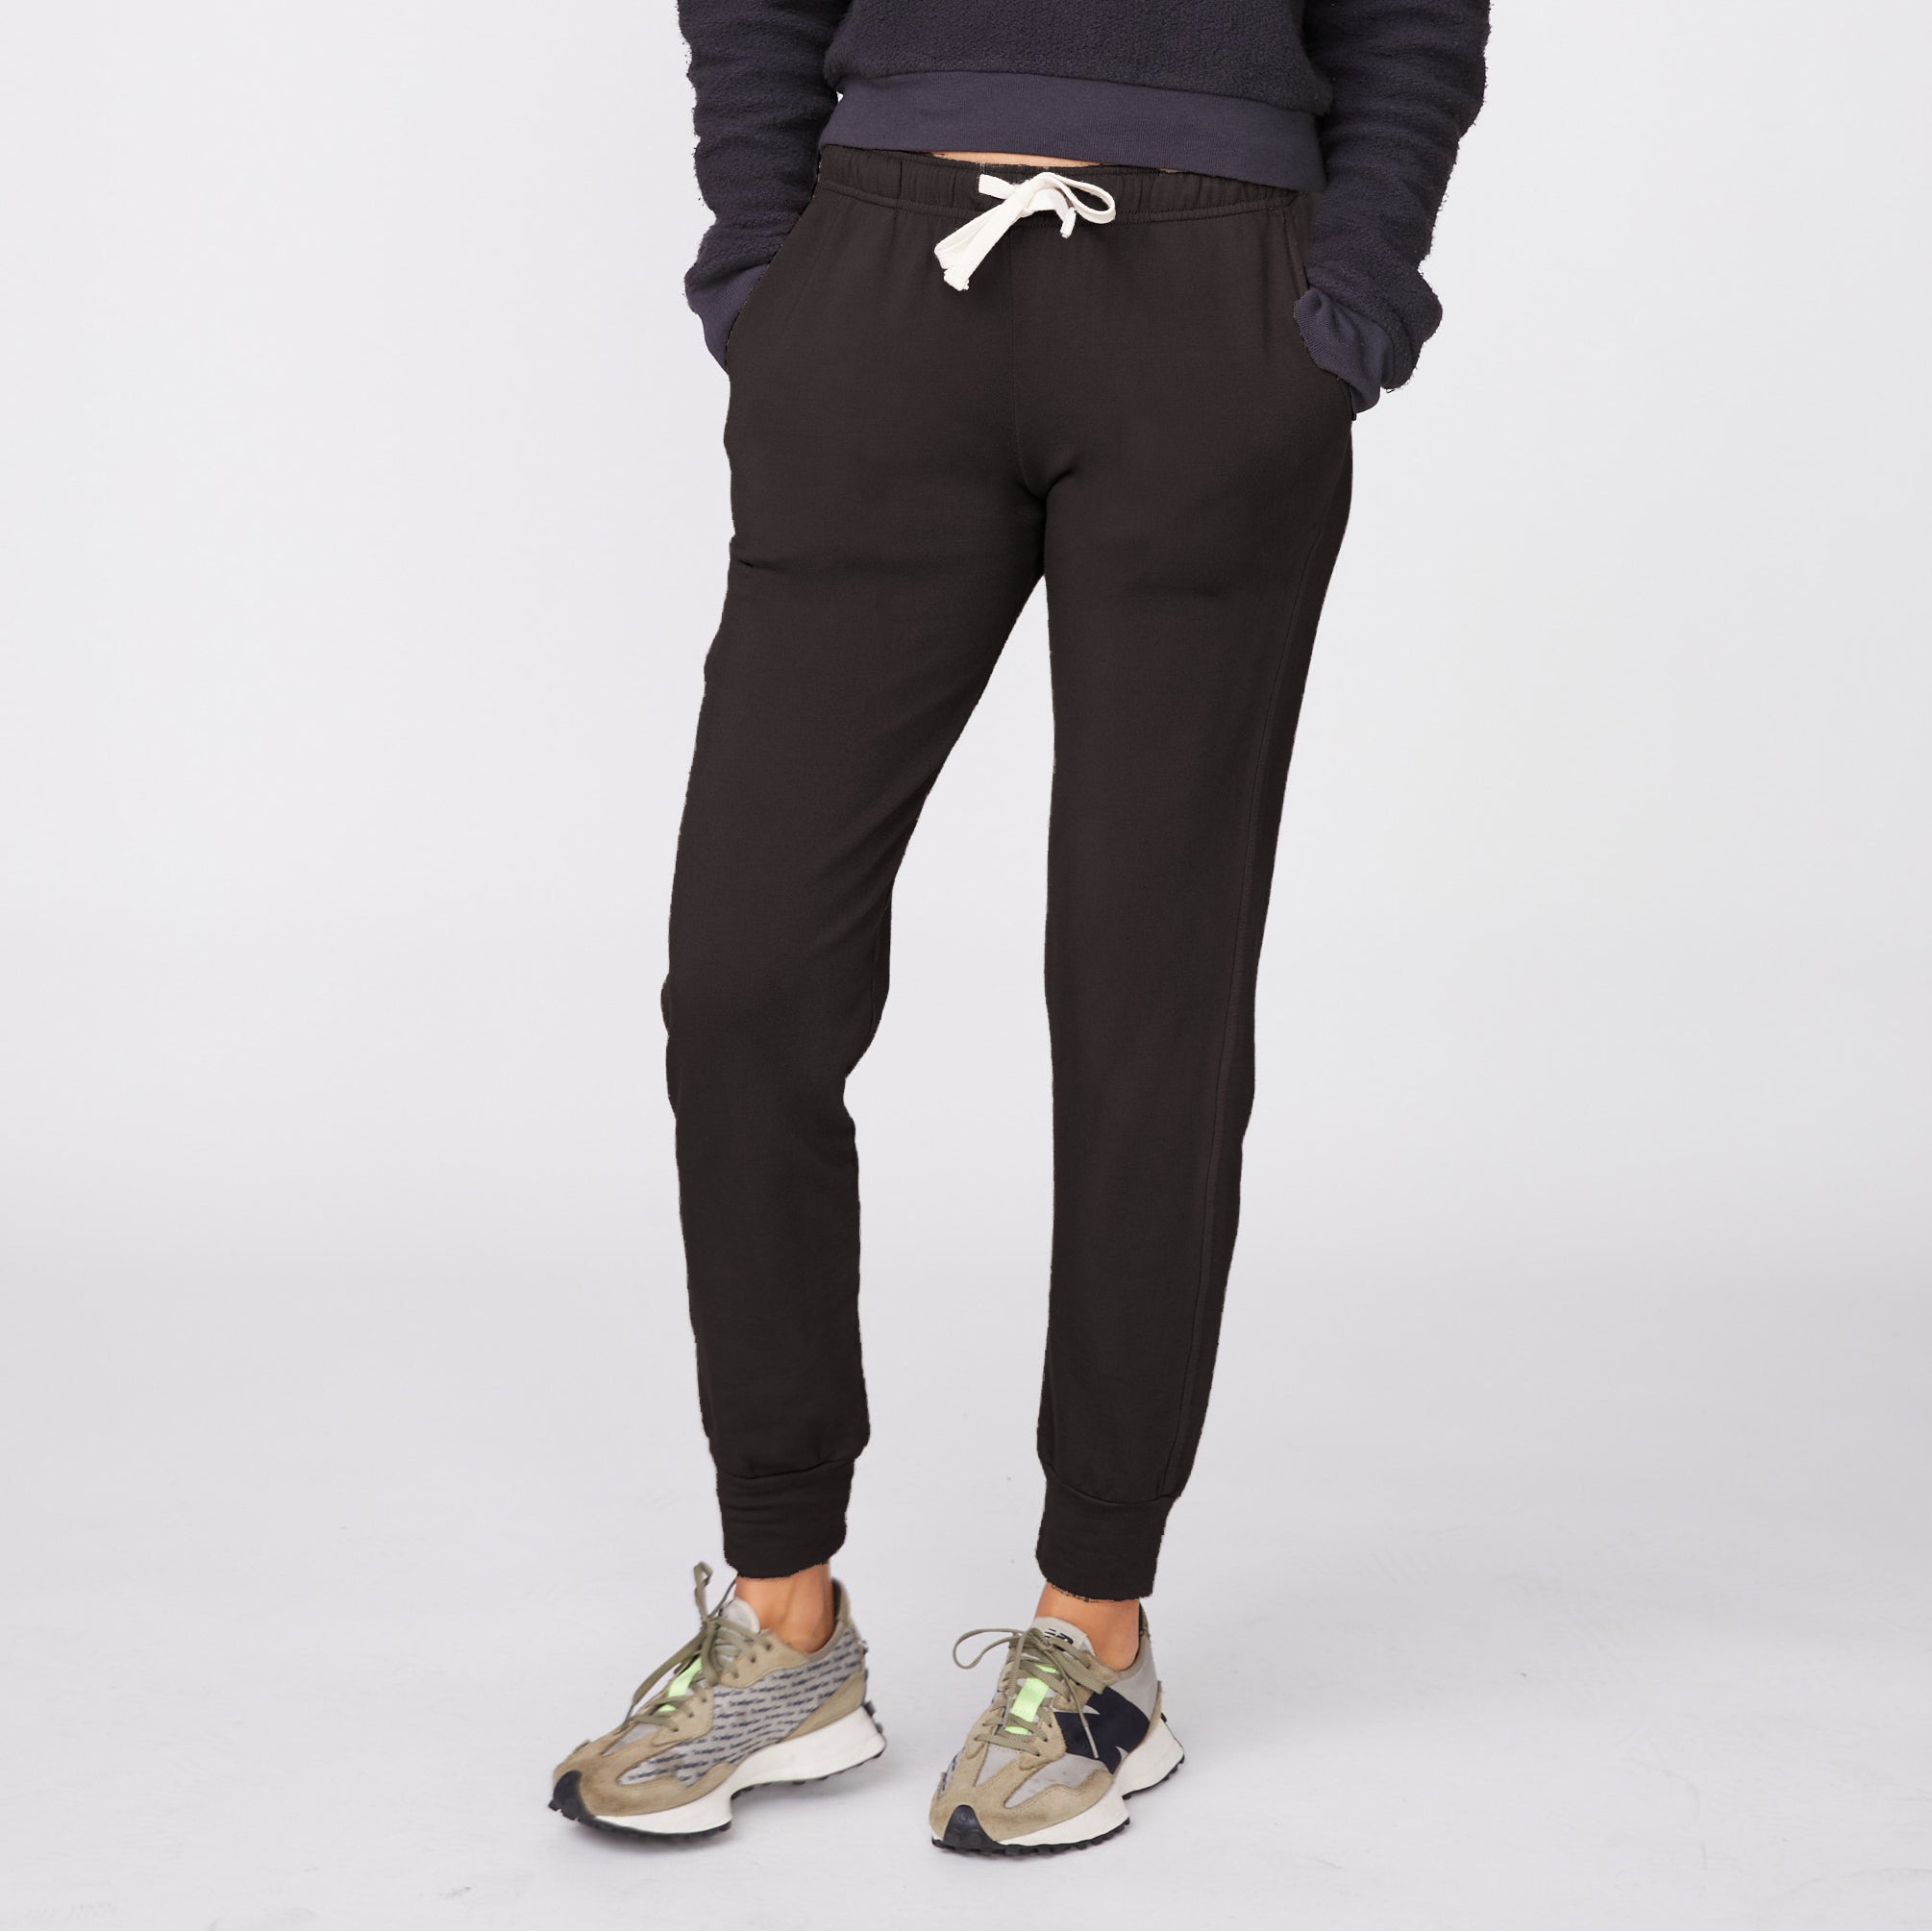 8 Pairs of Cozy Winter Pants from , Old Navy, Lululemon, and